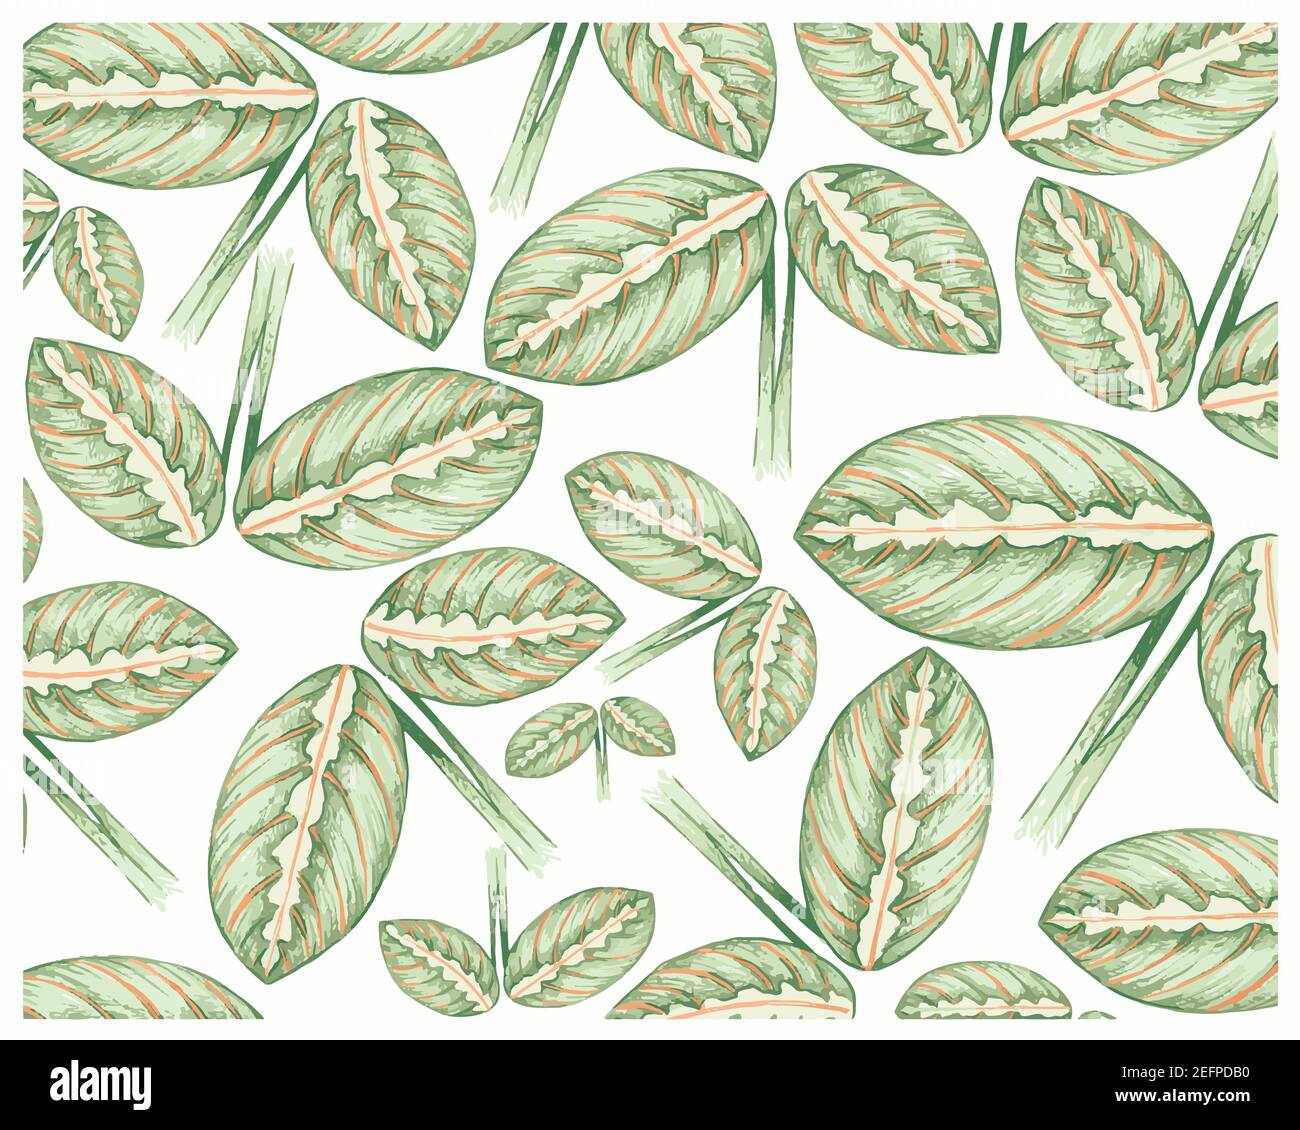 Illustration Background of Beautiful Calathea Makoyana, Cathedral Windows or Peacock Plant for Garden Decoration Stock Photo